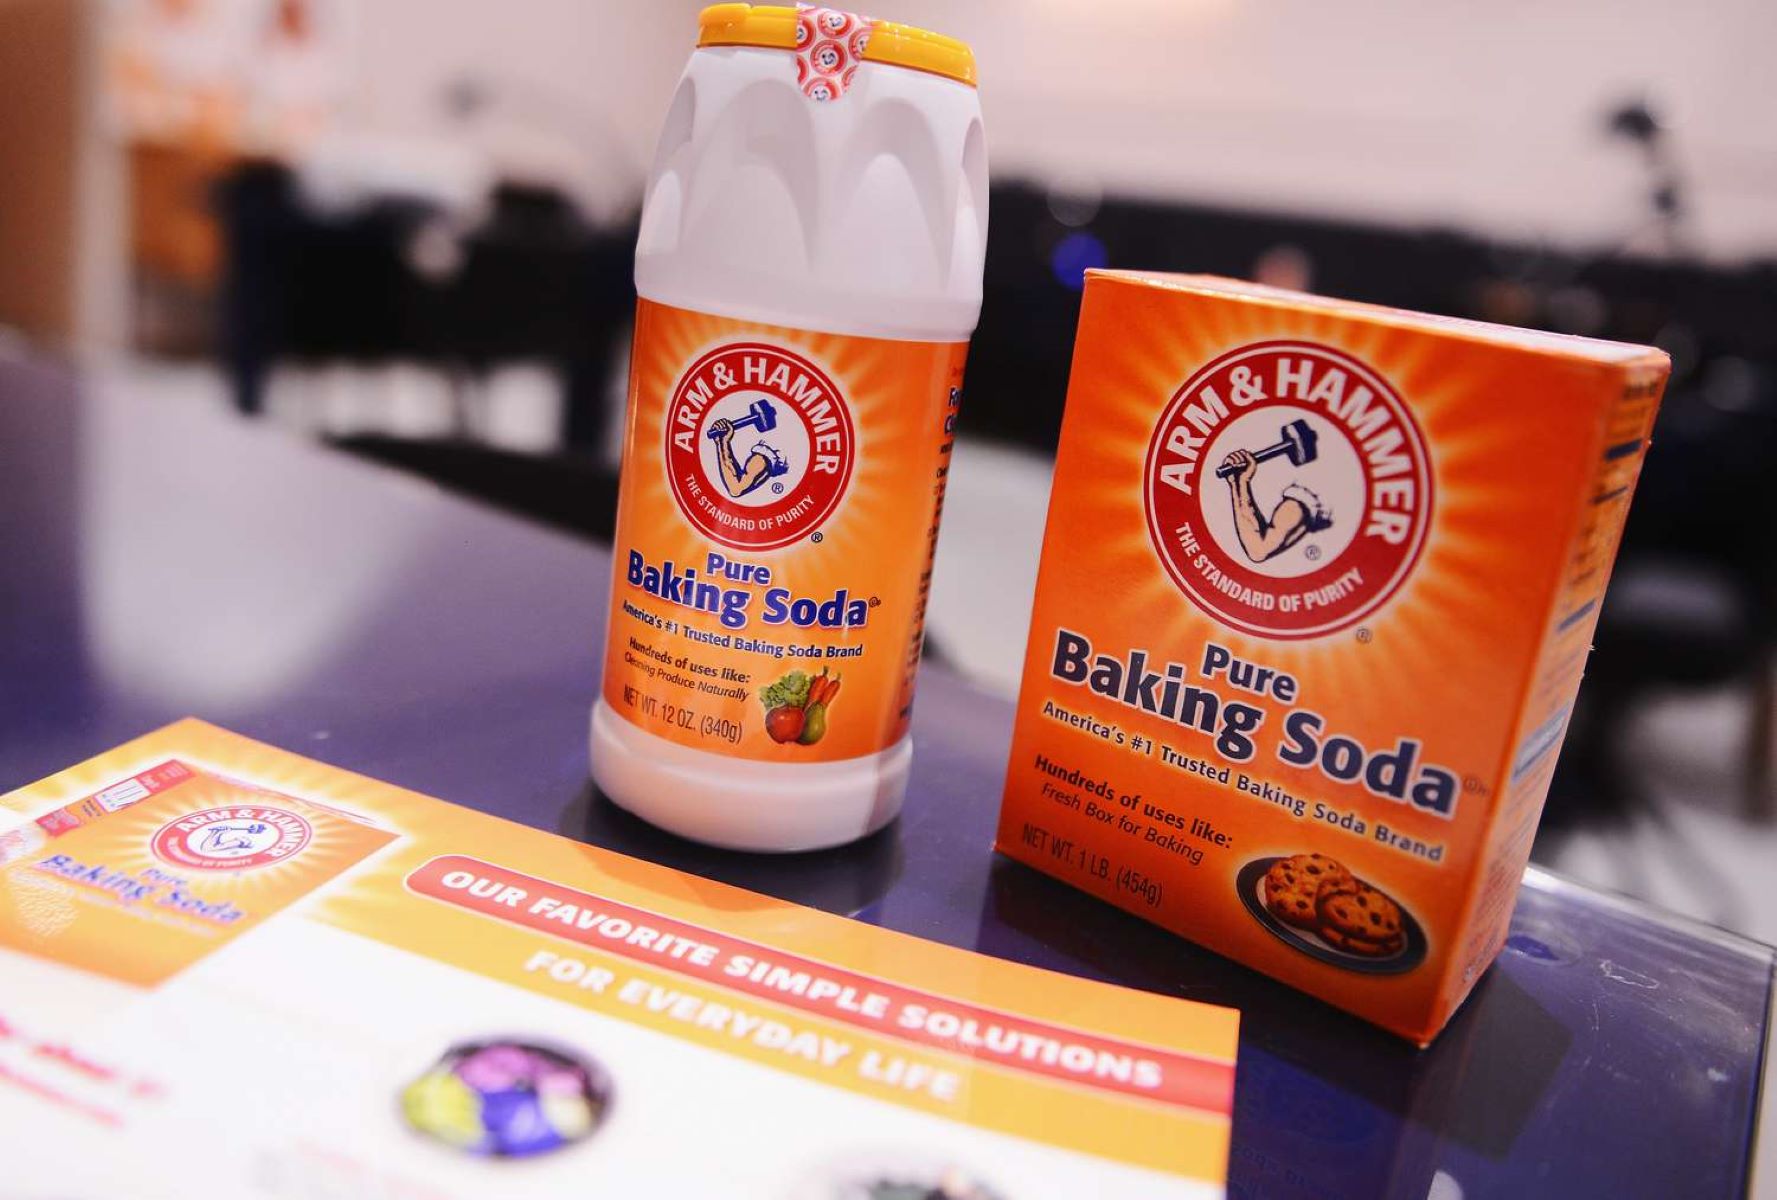 How To Use Baking Soda For Athletic Performance